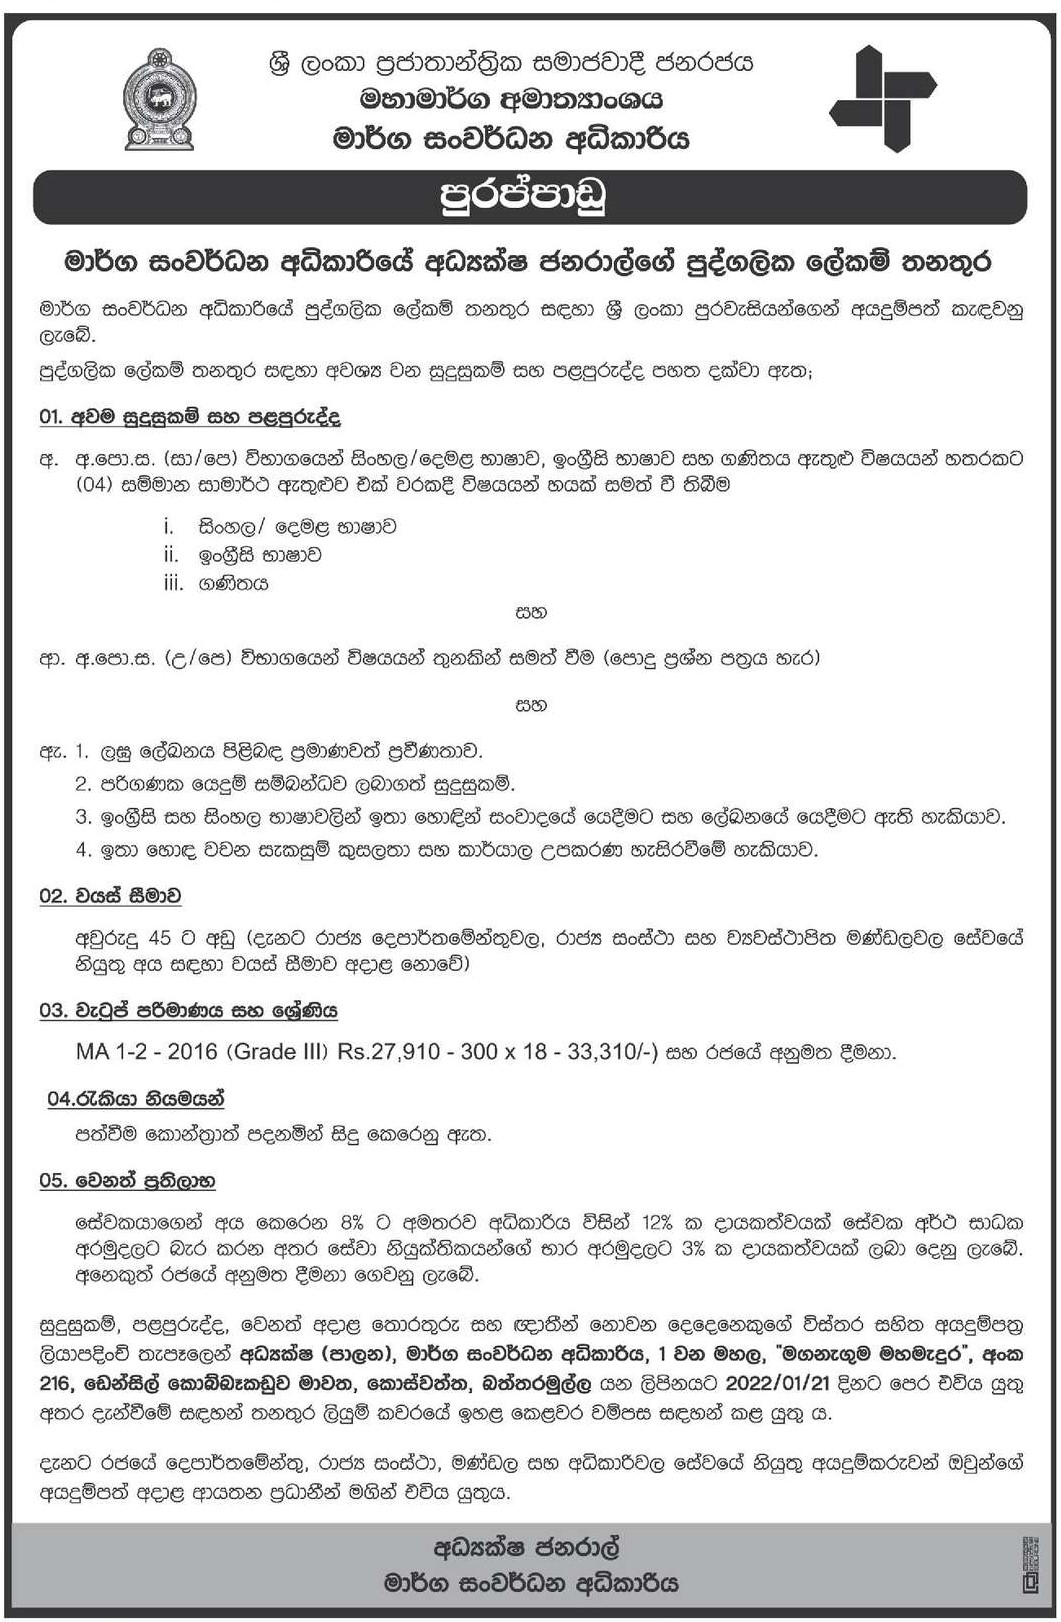 Personal Secretary to the Director General - Road Development Authority Sinhala Details